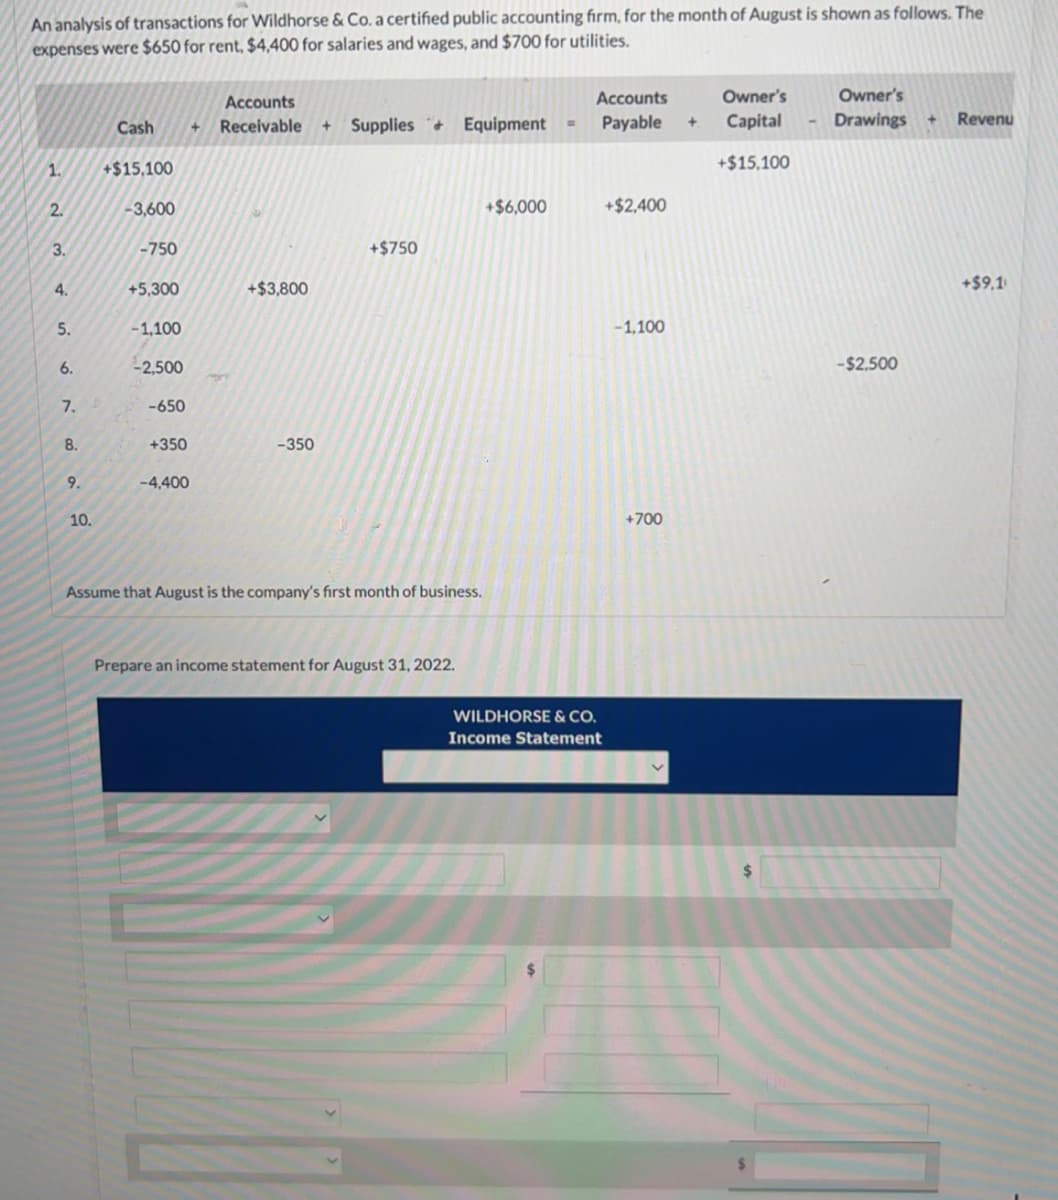 An analysis of transactions for Wildhorse & Co. a certified public accounting firm, for the month of August is shown as follows. The
expenses were $650 for rent, $4,400 for salaries and wages, and $700 for utilities.
1.
2.
3.
4.
5.
6.
7. D
8.
9.
Cash
+$15,100
10.
-3,600
-750
+5,300
-1,100
-2,500
-650
+350
-4,400
+
Accounts
Receivable
+$3,800
-350
Supplies Equipment
+
+$750
Assume that August is the company's first month of business.
Prepare an income statement for August 31, 2022.
+$6,000
=
Accounts
Payable
WILDHORSE & CO.
Income Statement
+$2,400
-1,100
+700
+
Owner's
Capital
+$15,100
Owner's
Drawings
-$2.500
+ Revenu
+$9,1